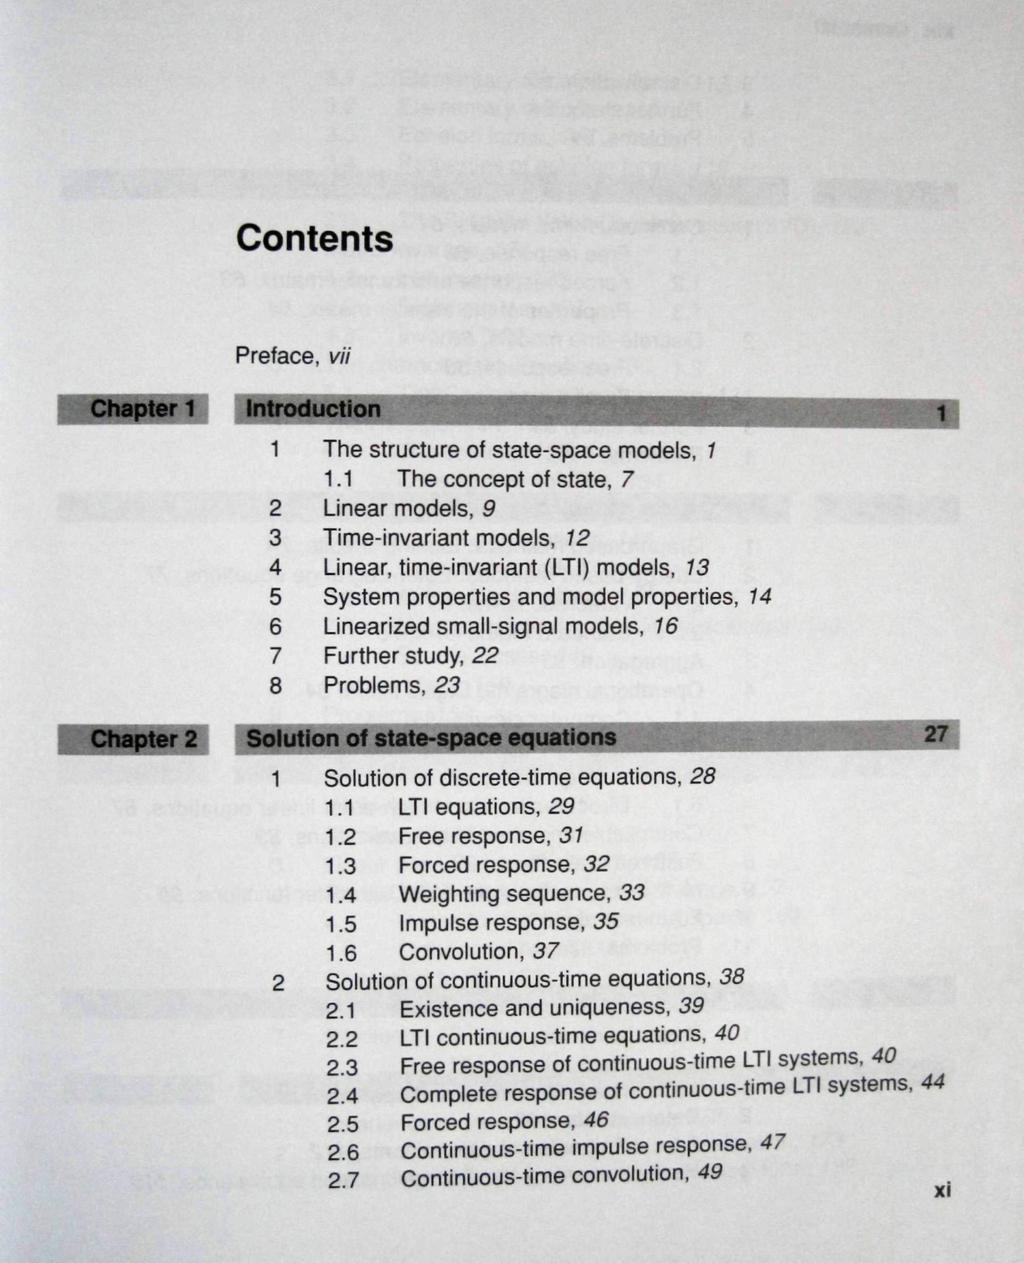 Contents Preface, vii WT^ TnfroSiicnon' 1 The structure of state-space models, 1 1.1 The concept of state, 7 2 Linear models, 9 3 Time-invariant models.